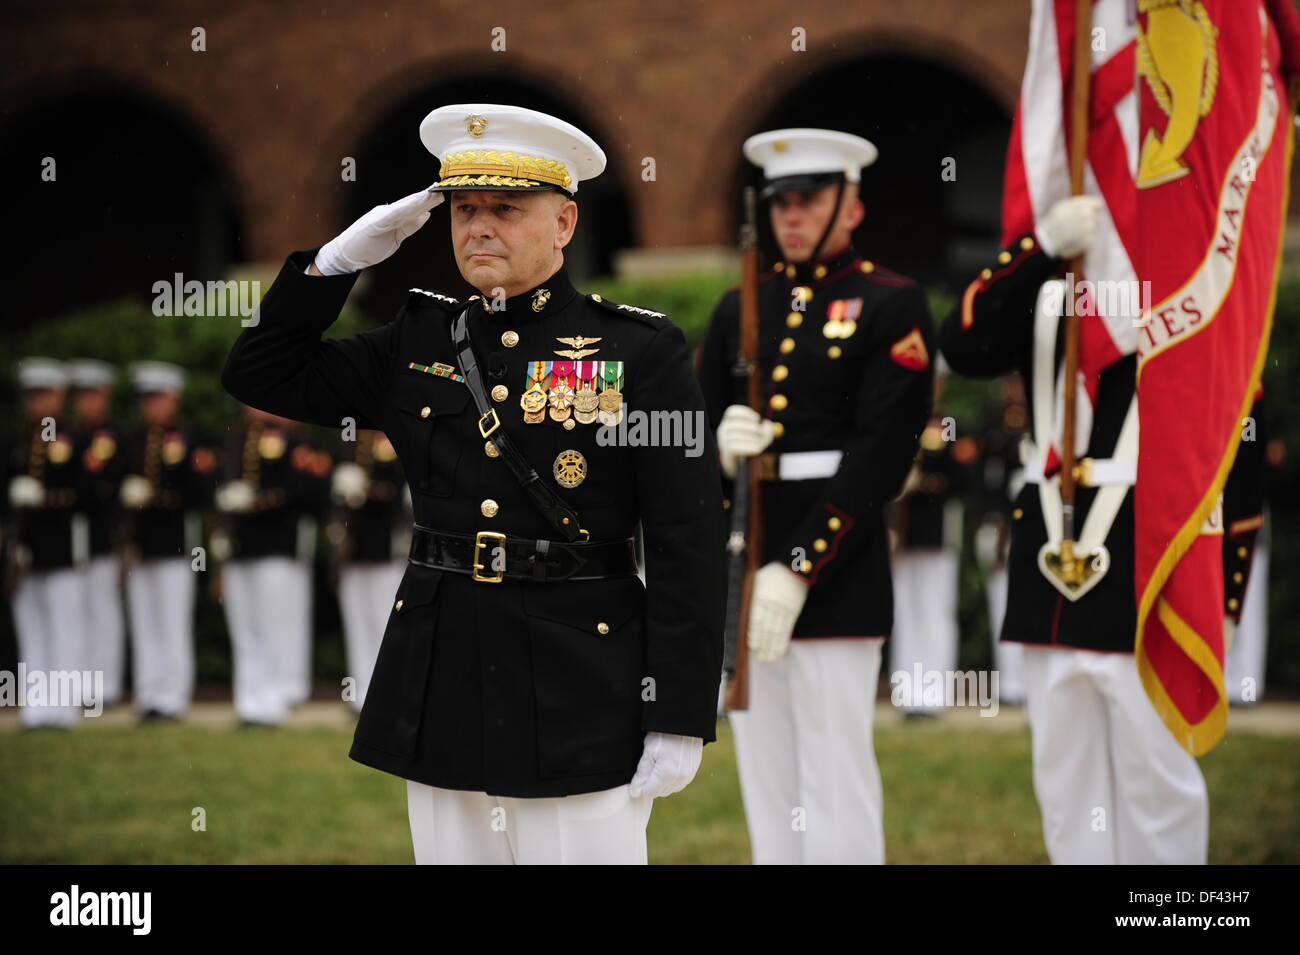 Joint Chiefs of Staff Vice Chairman United States Marine General James E. Cartwright salutes during the playing of the national anthem during a farewell ceremony in his honor at the U.S. Marine Corps Barracks, Washington, D.C., August 3, 2011. Cartwright is a target of a U.S. Justice Department investigation into a leak of information about a covert U.S.-Israeli cyberattack on Iranâ??s nuclear program. Mandatory Credit: Jacob N. Bailey / DoD via CNP Stock Photo